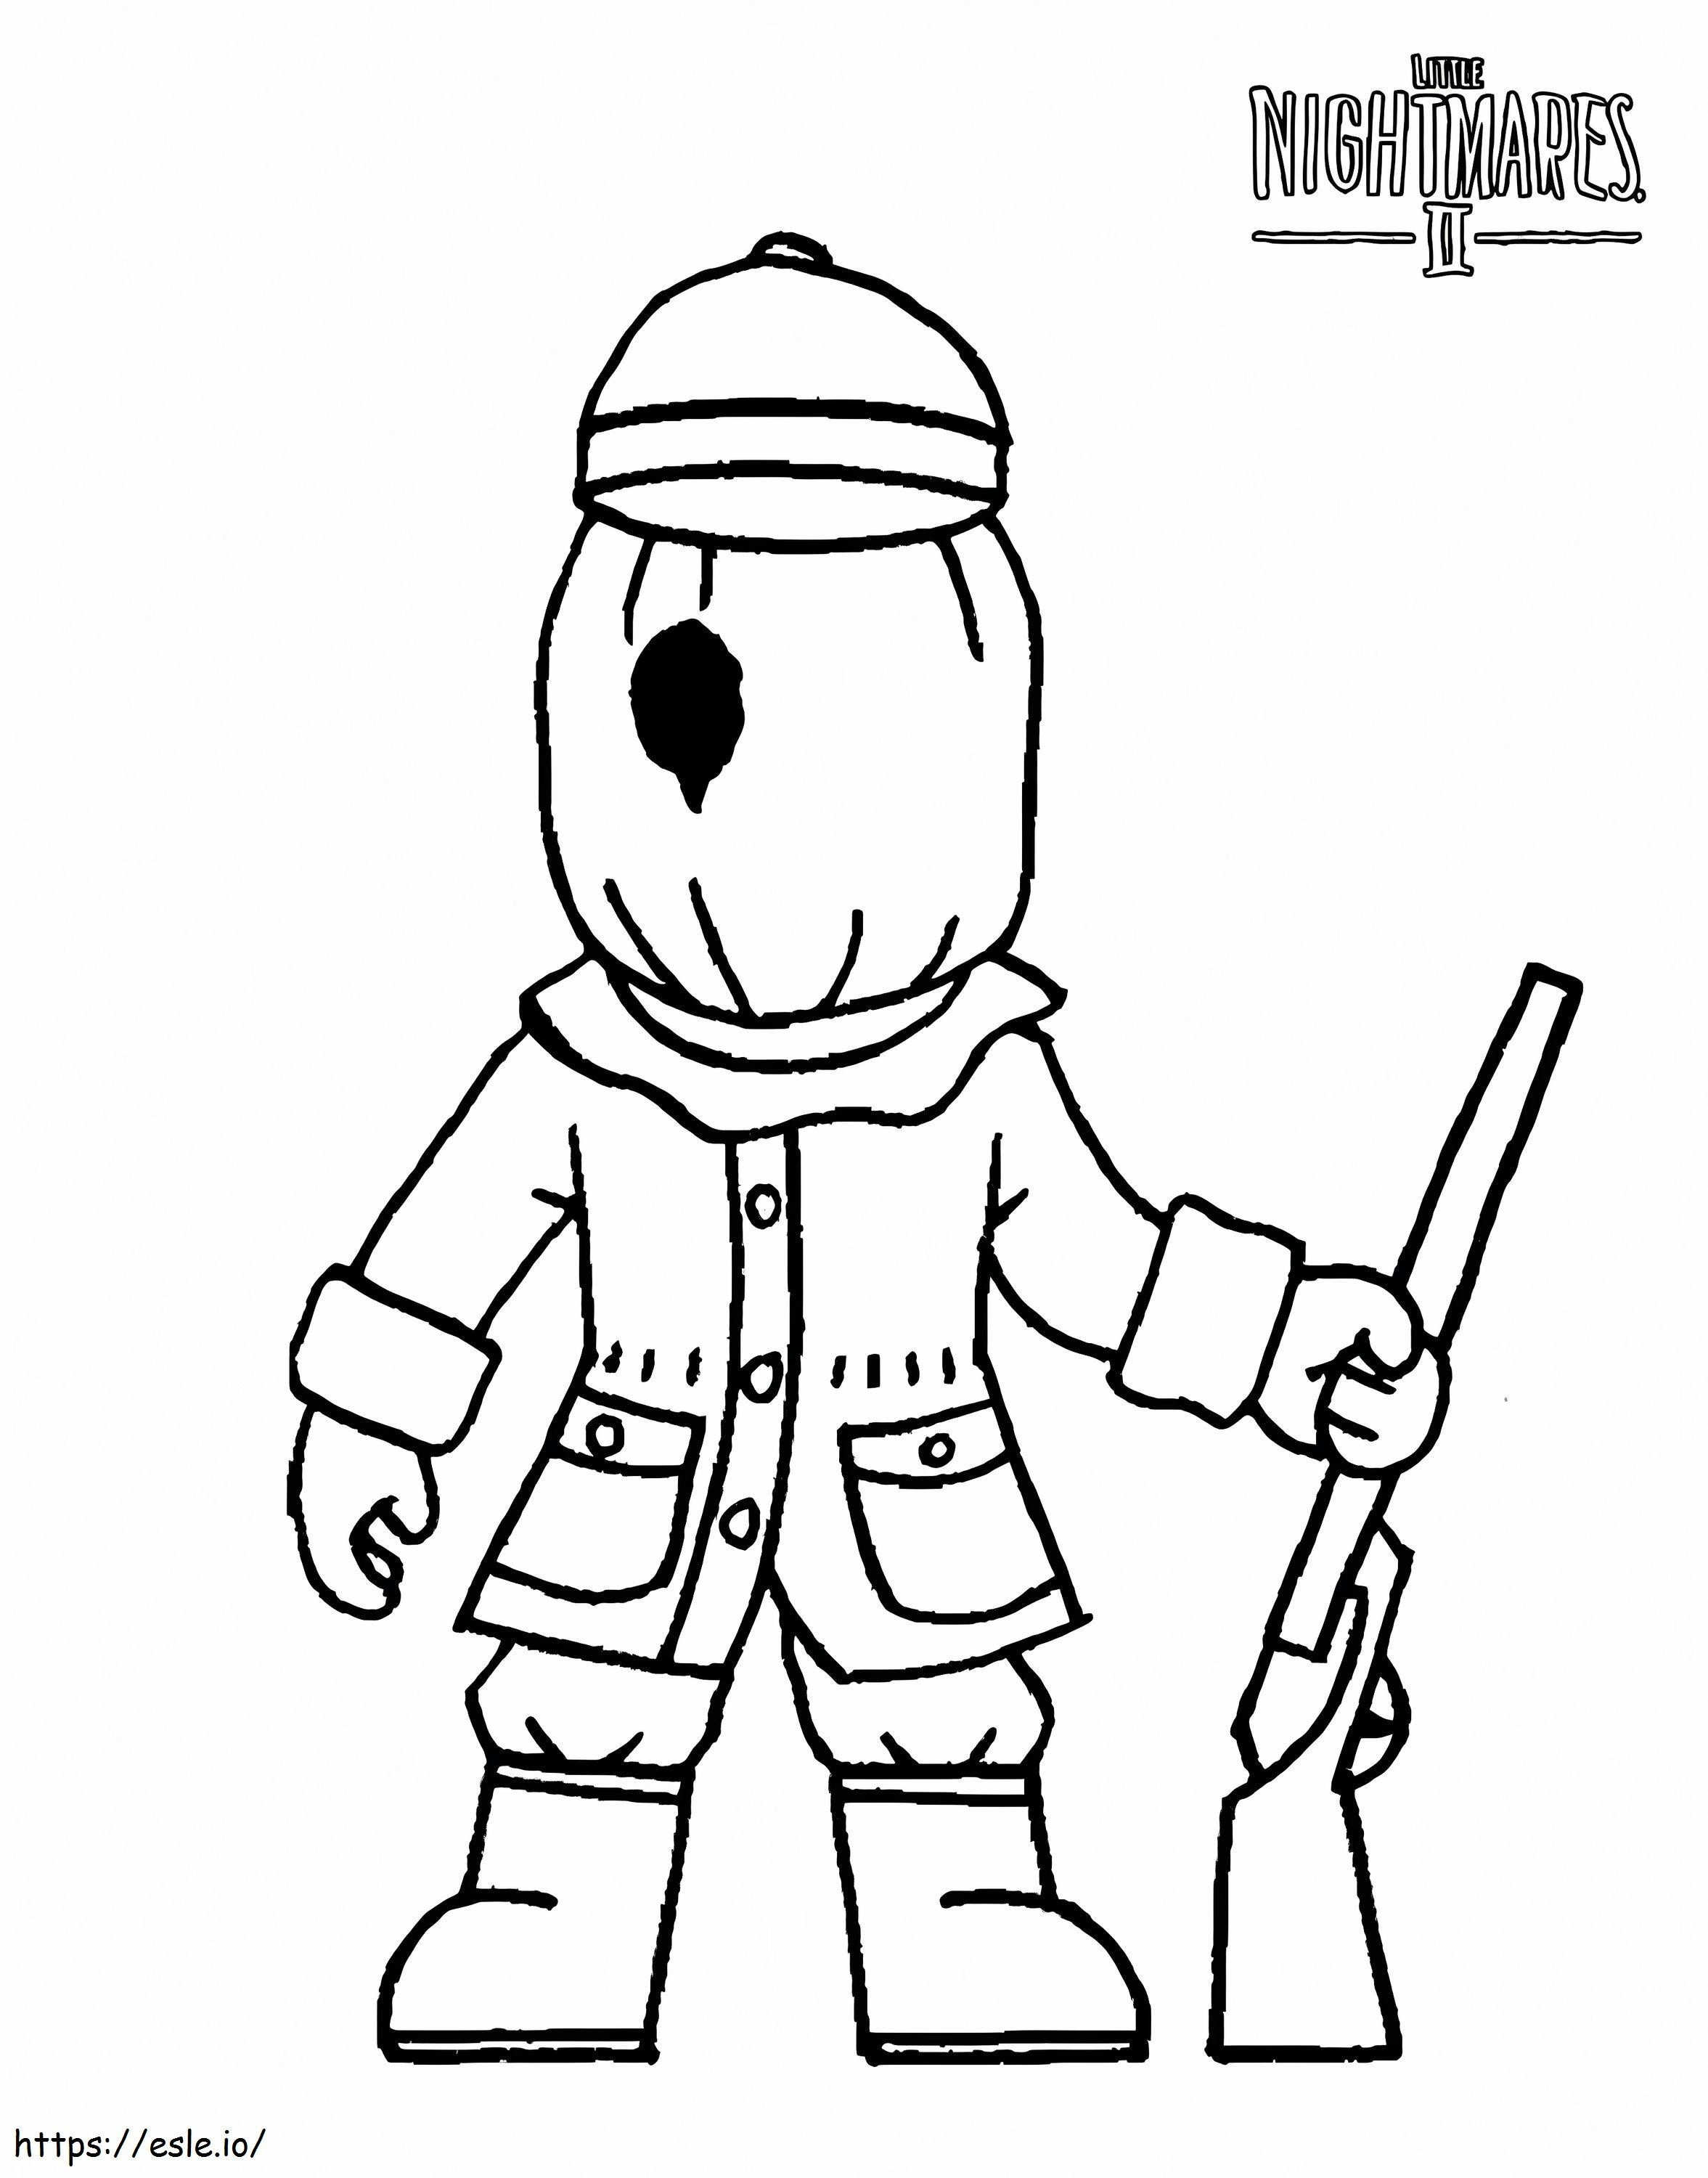 Little Nightmares The Hunter coloring page